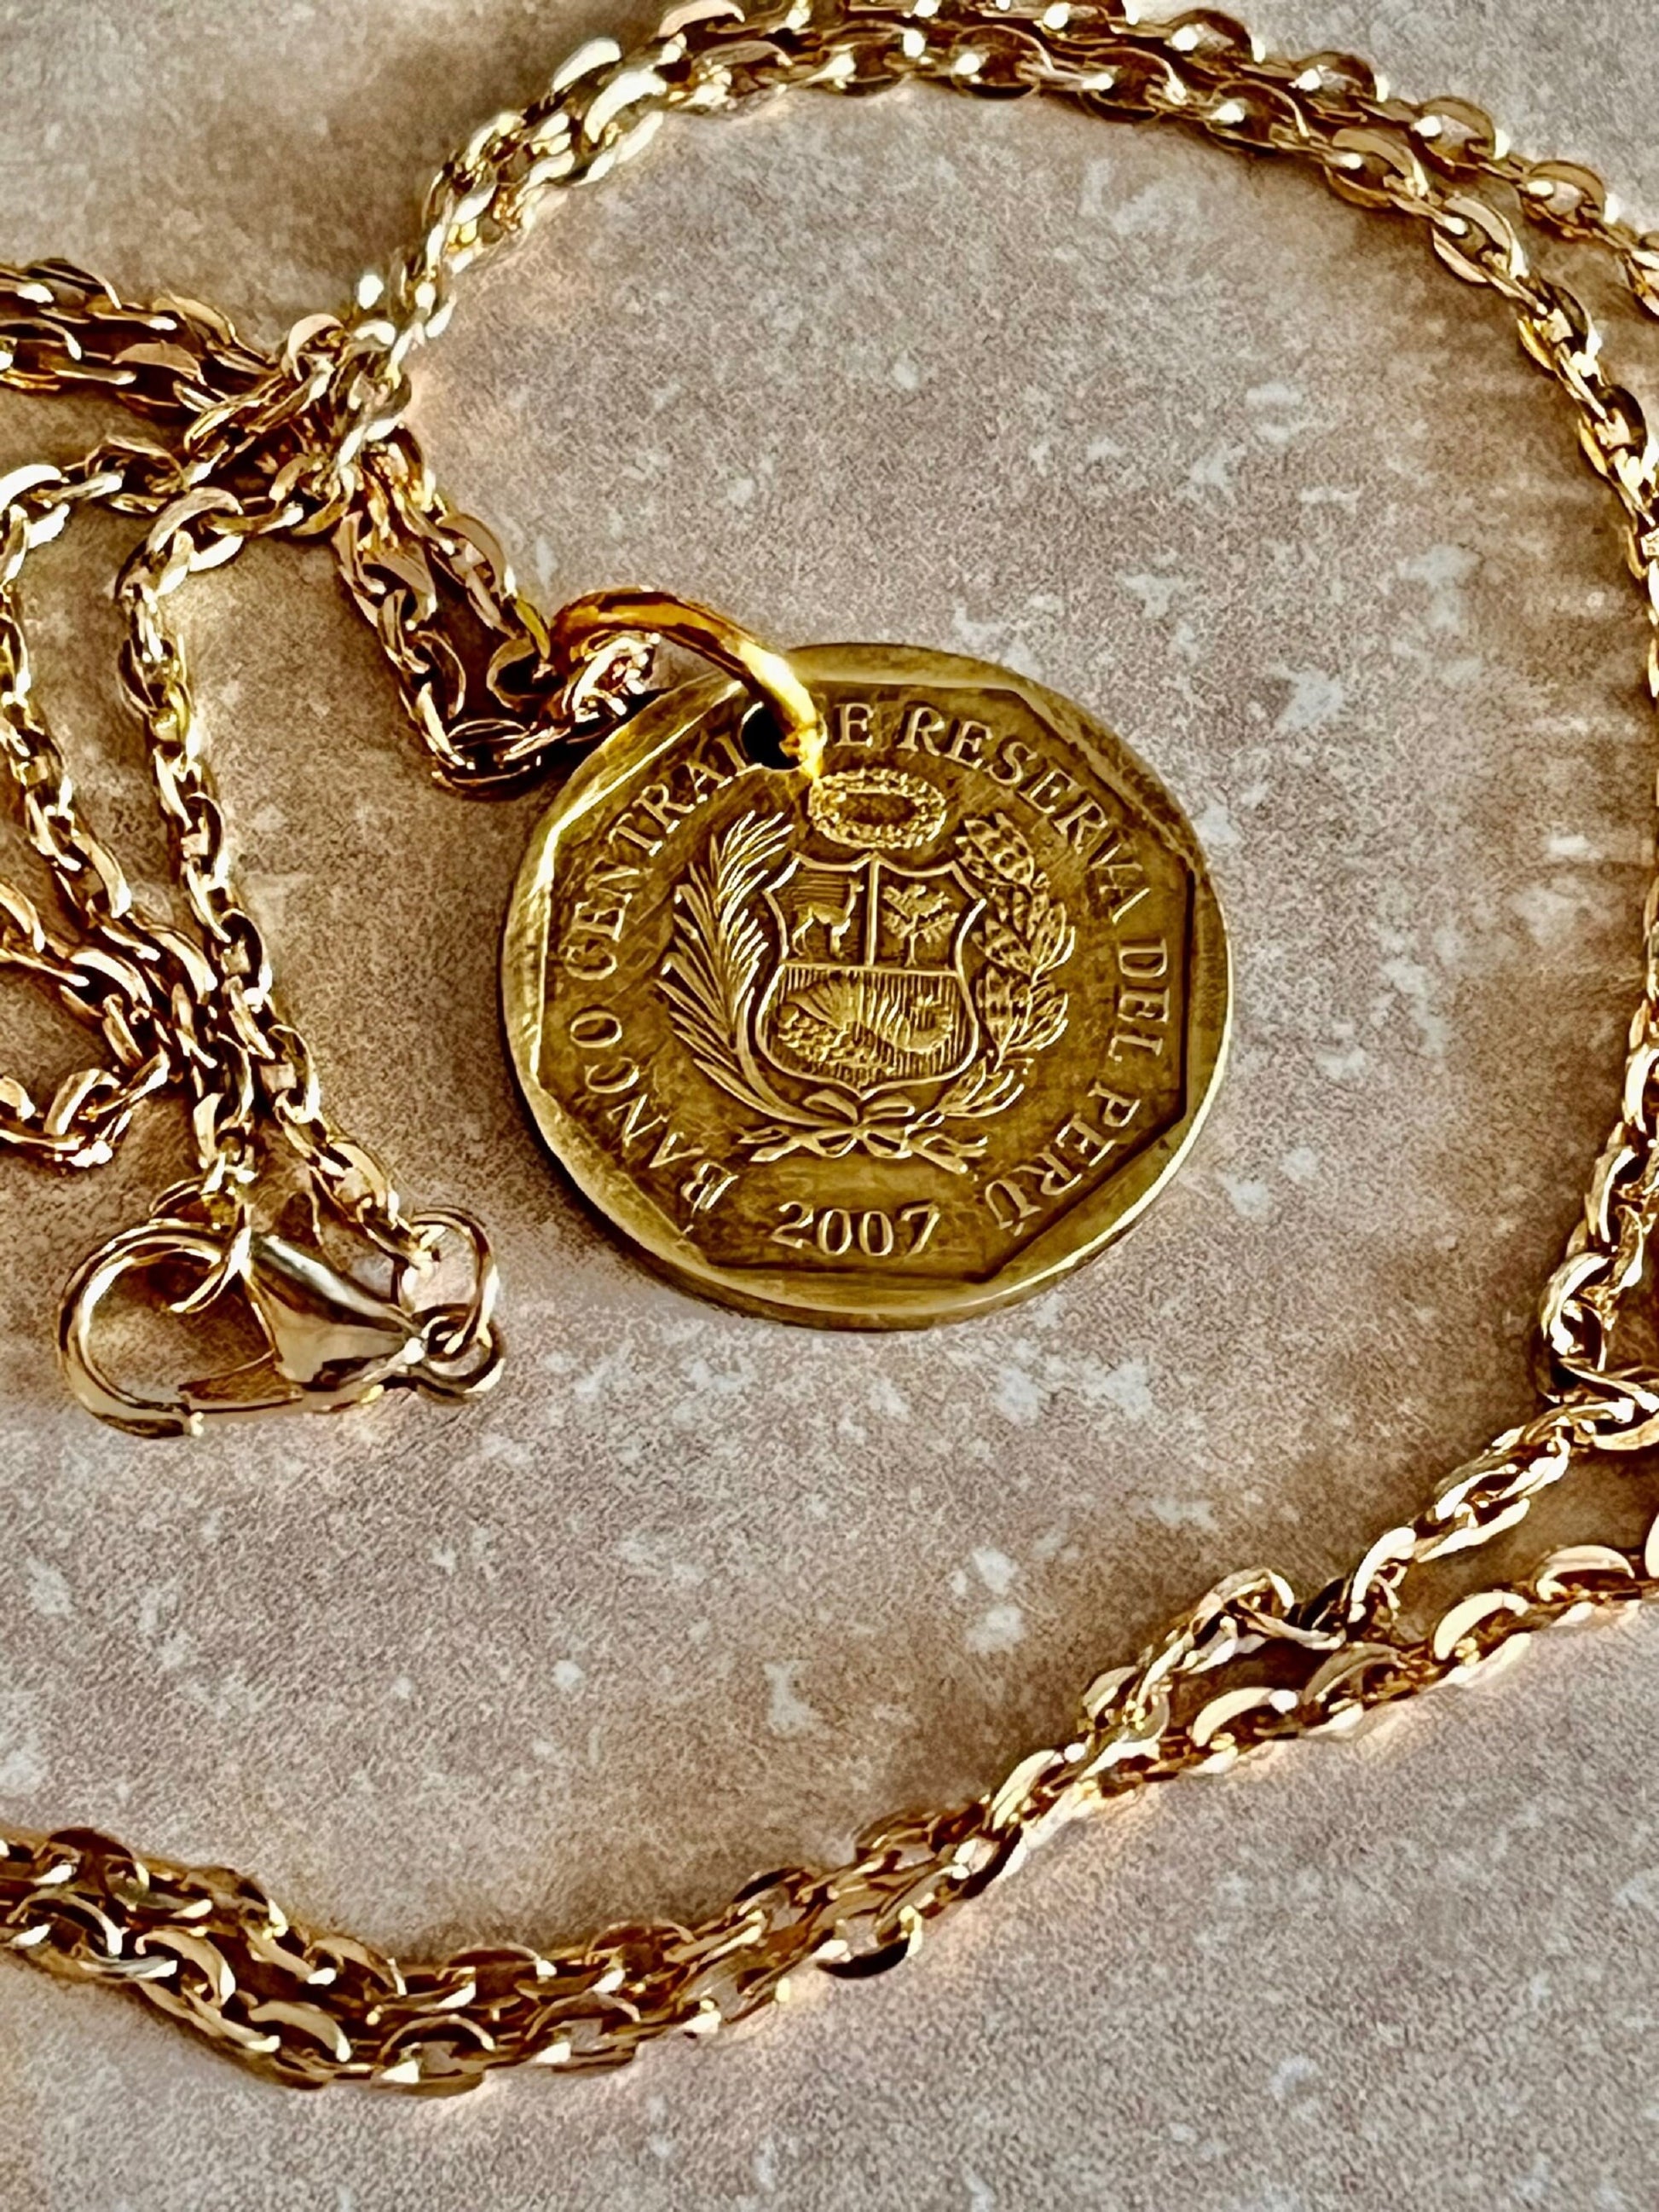 Peru Coin Pendant Peruvian 10 Centimos De Oro Personal Necklace Old Vintage Handmade Jewelry Gift Friend For Him Her World Coin Collector